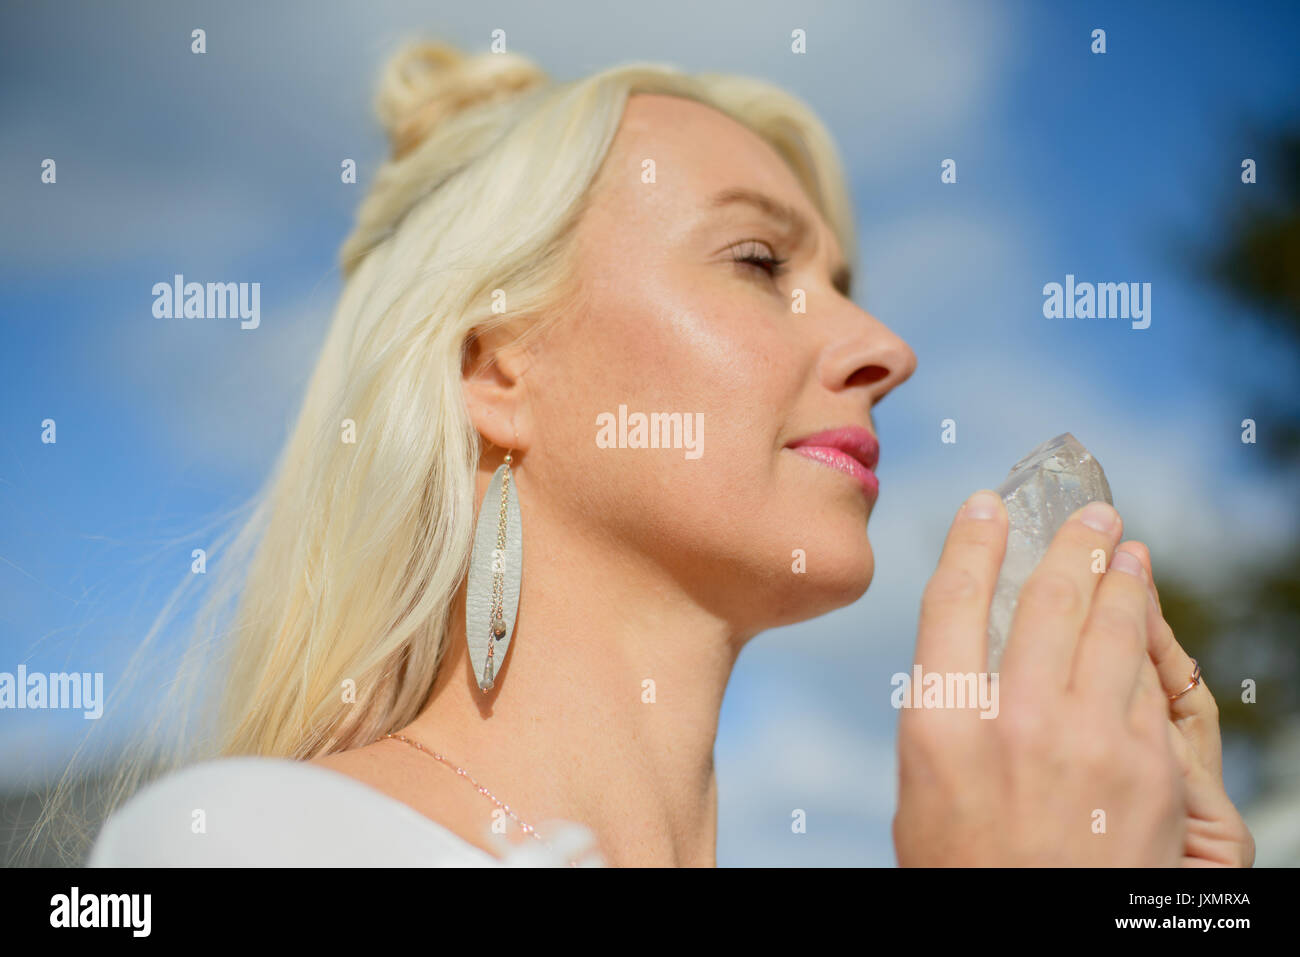 Mid adult woman meditating holding crystal against blue sky Stock Photo